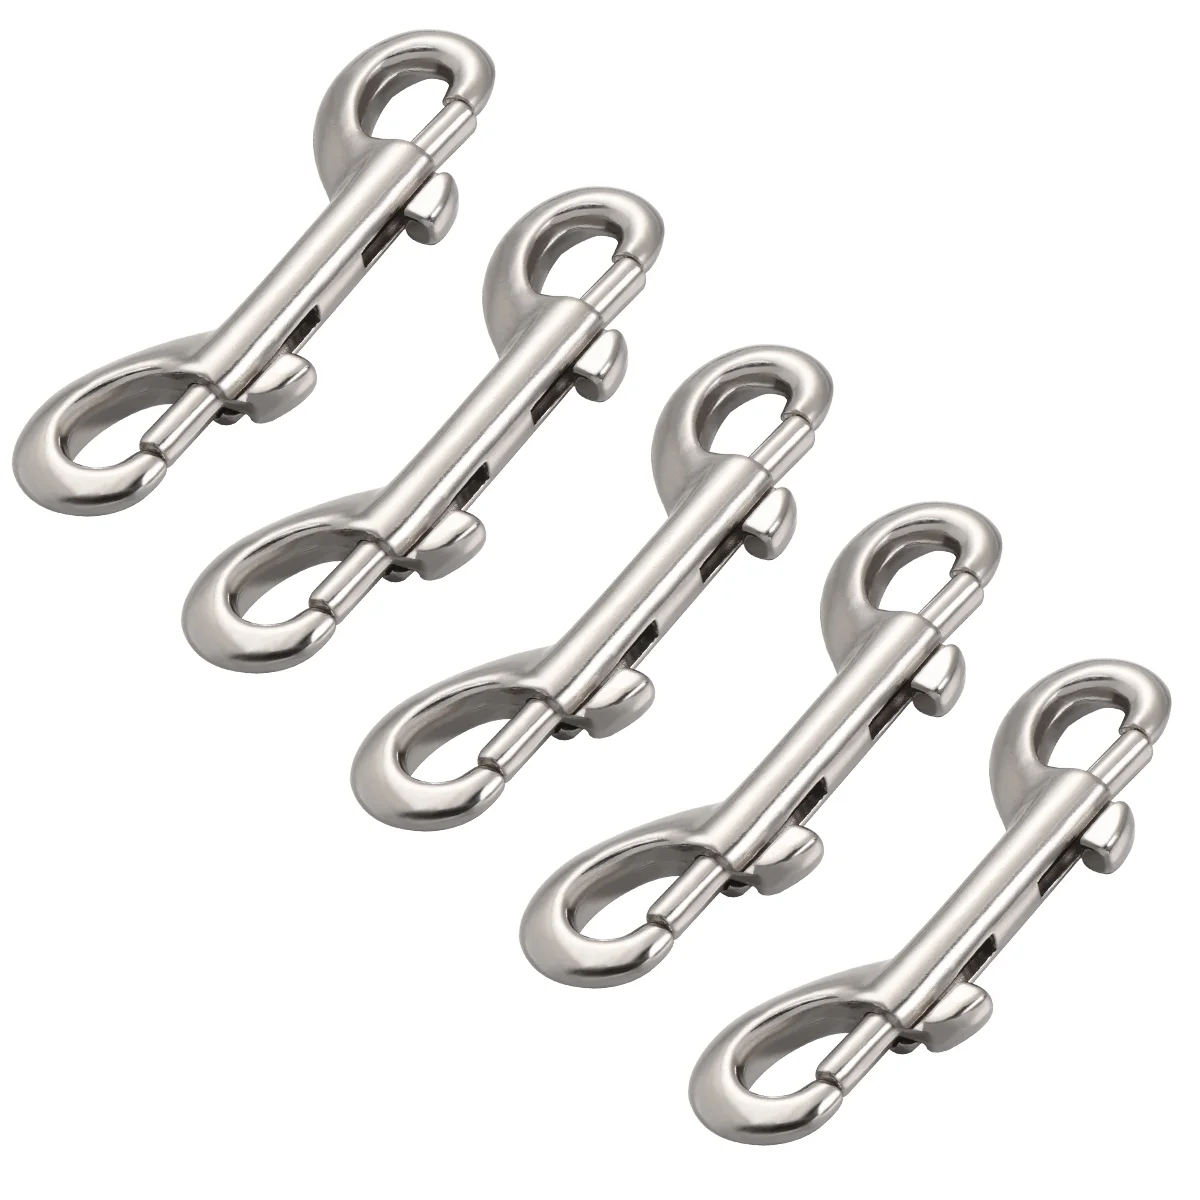 LIOOBO 5PCS Double Sided Bolt Snap Hook Zinc Alloy Portable Diving Clips for Belting Key Chains Straps Leathercraft Bags 